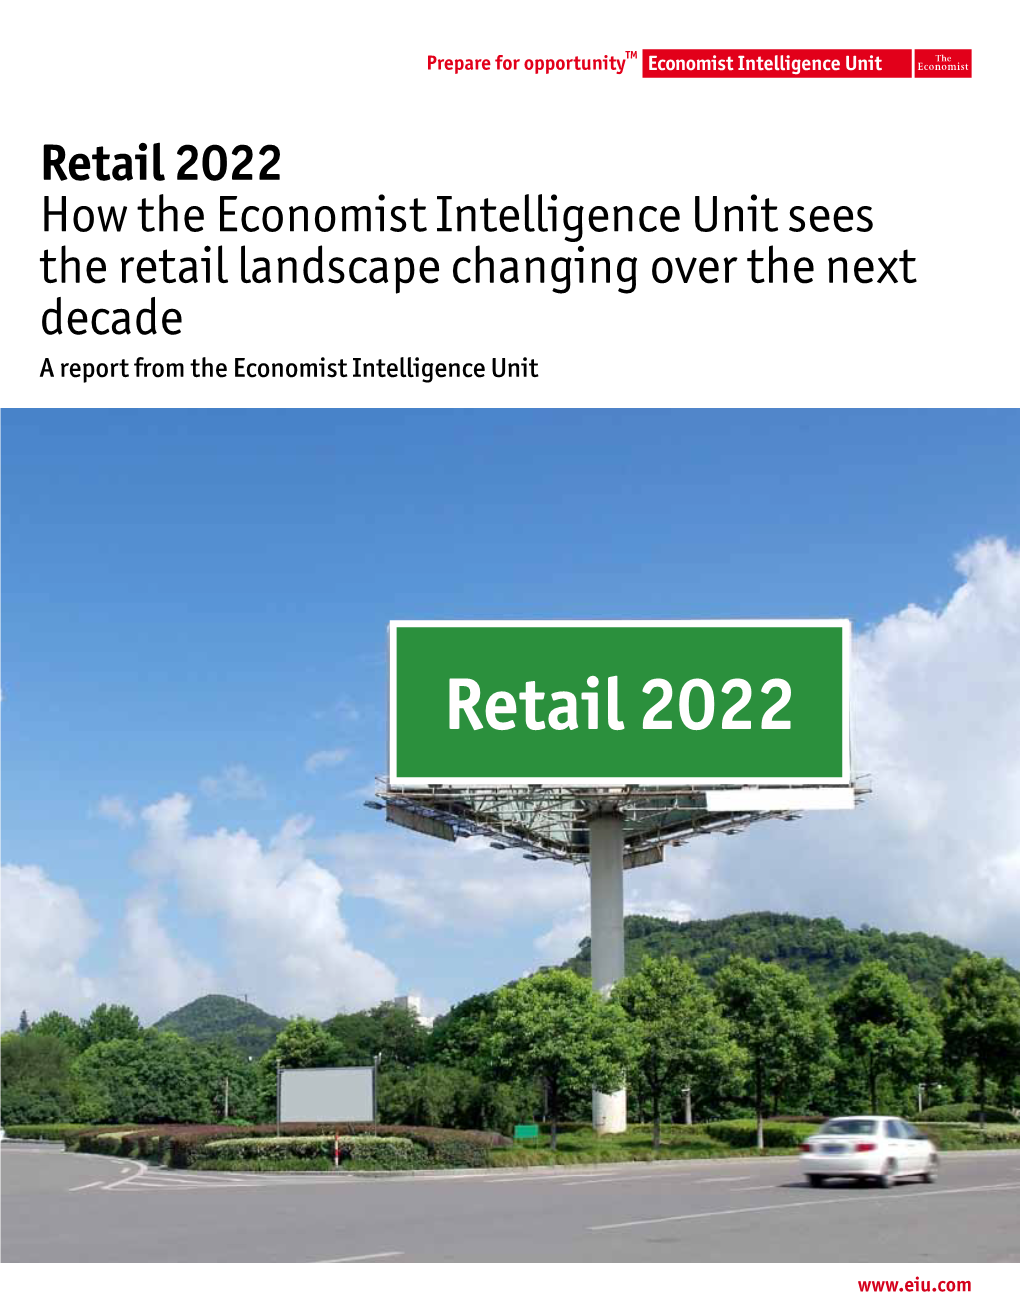 Retail 2022 How the Economist Intelligence Unit Sees the Retail Landscape Changing Over the Next Decade a Report from the Economist Intelligence Unit